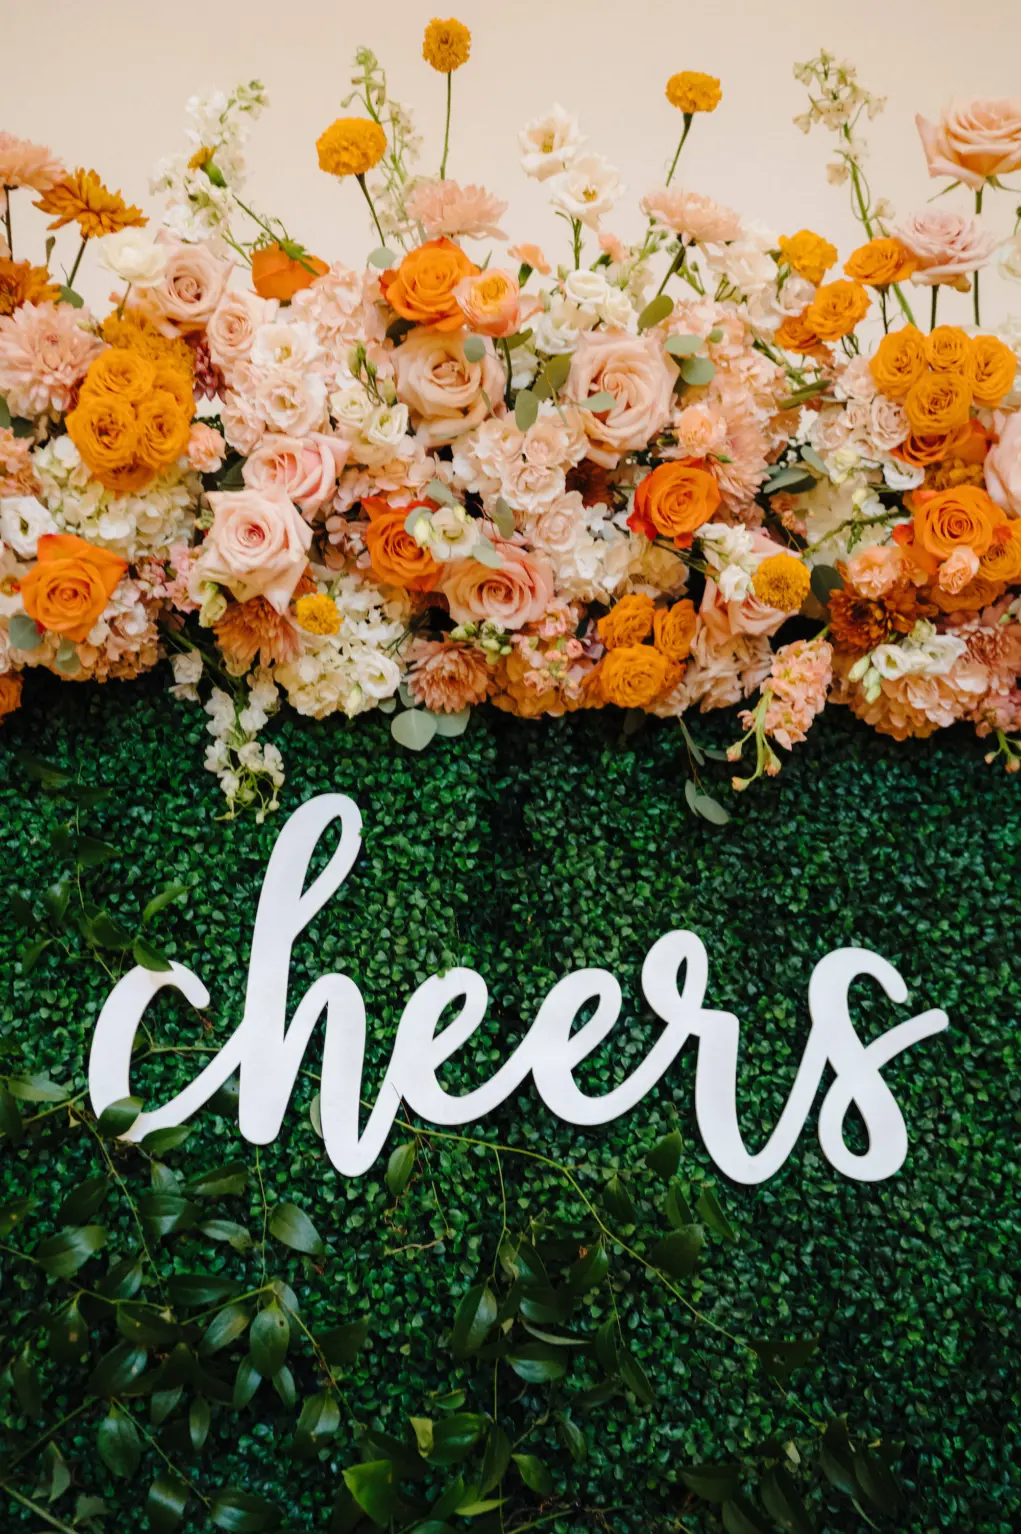 Cheers Orange and Pink Greenery Photo Booth Backdrop Ideas for Spring Wedding Reception